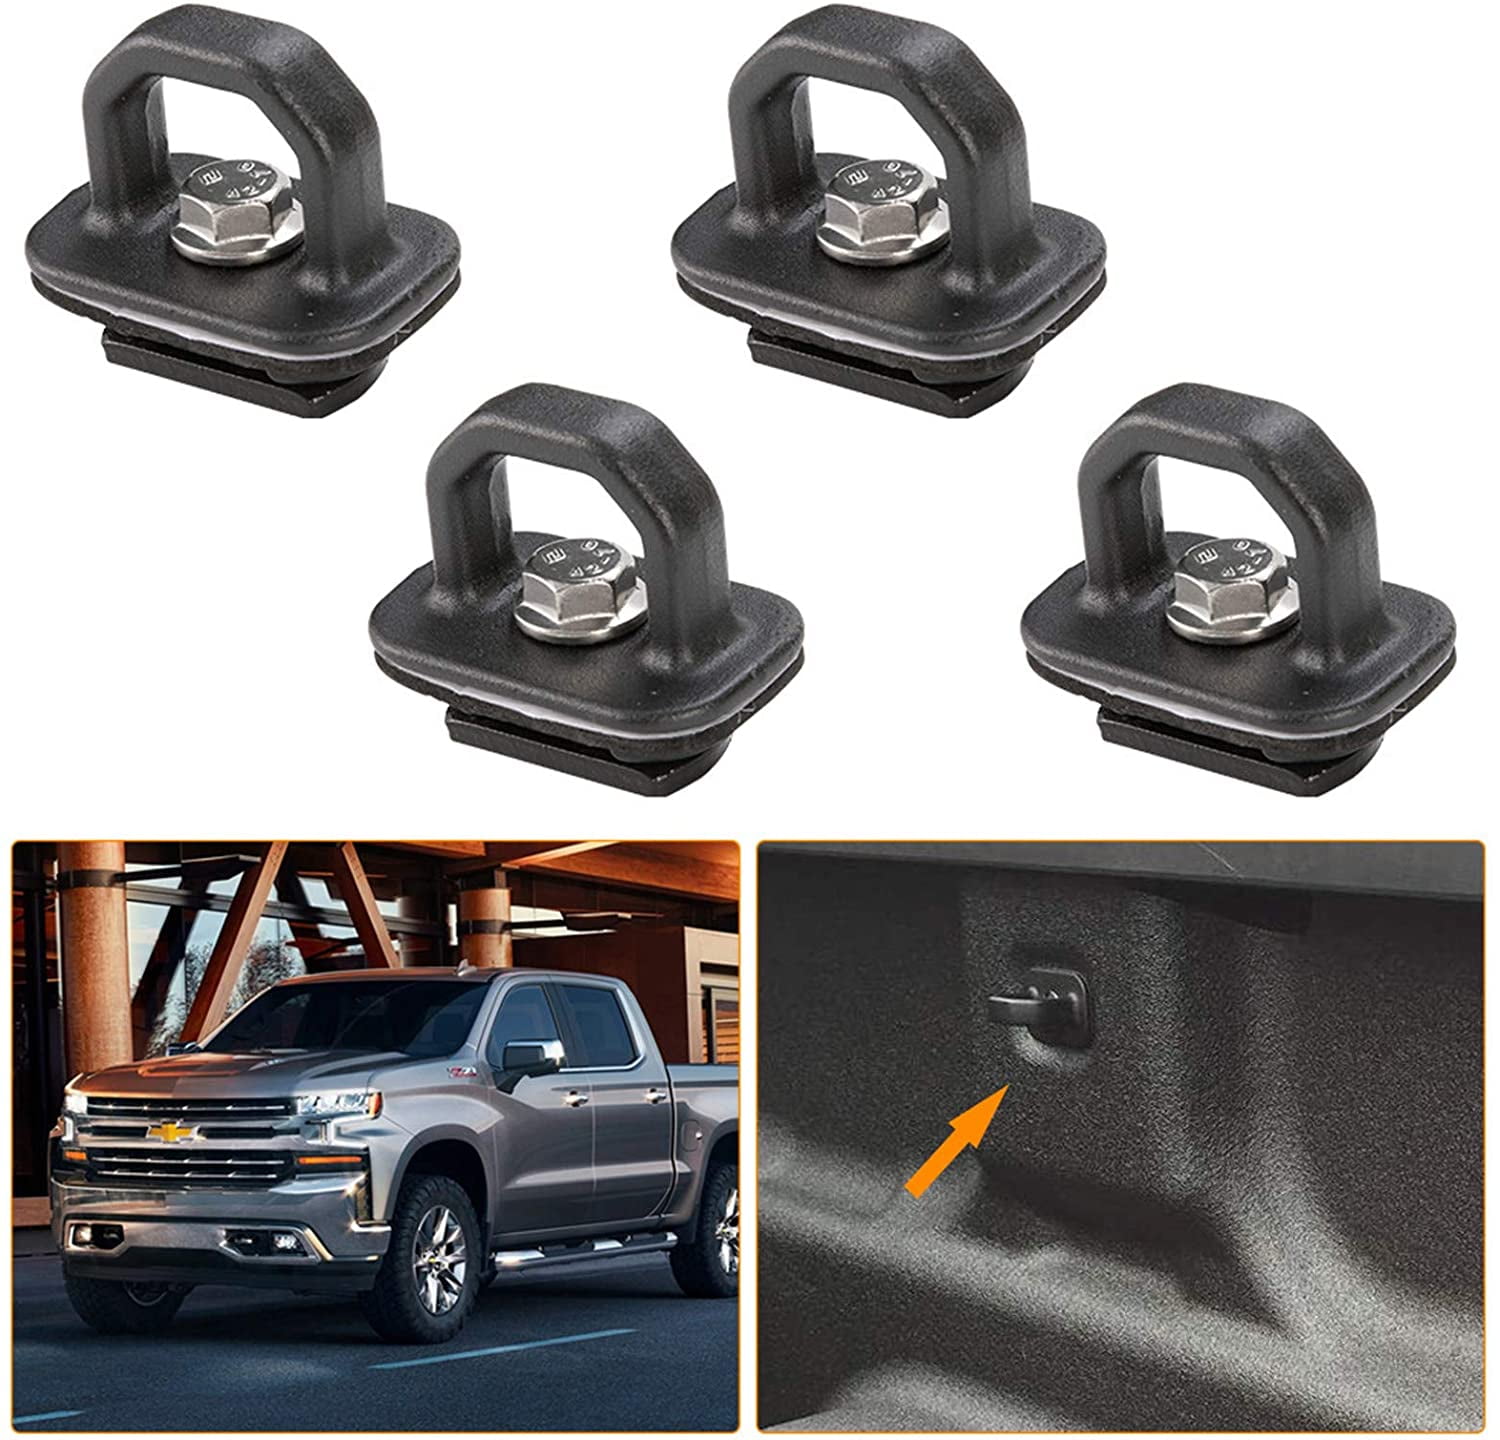 USTAR 10-Pack Truck Bed Side Wall Anchor Pickup Tie Downs Anchors Compatible with Chevy Silverdo Sierra 2007-2018,Colorado Canyon 2015-2018 